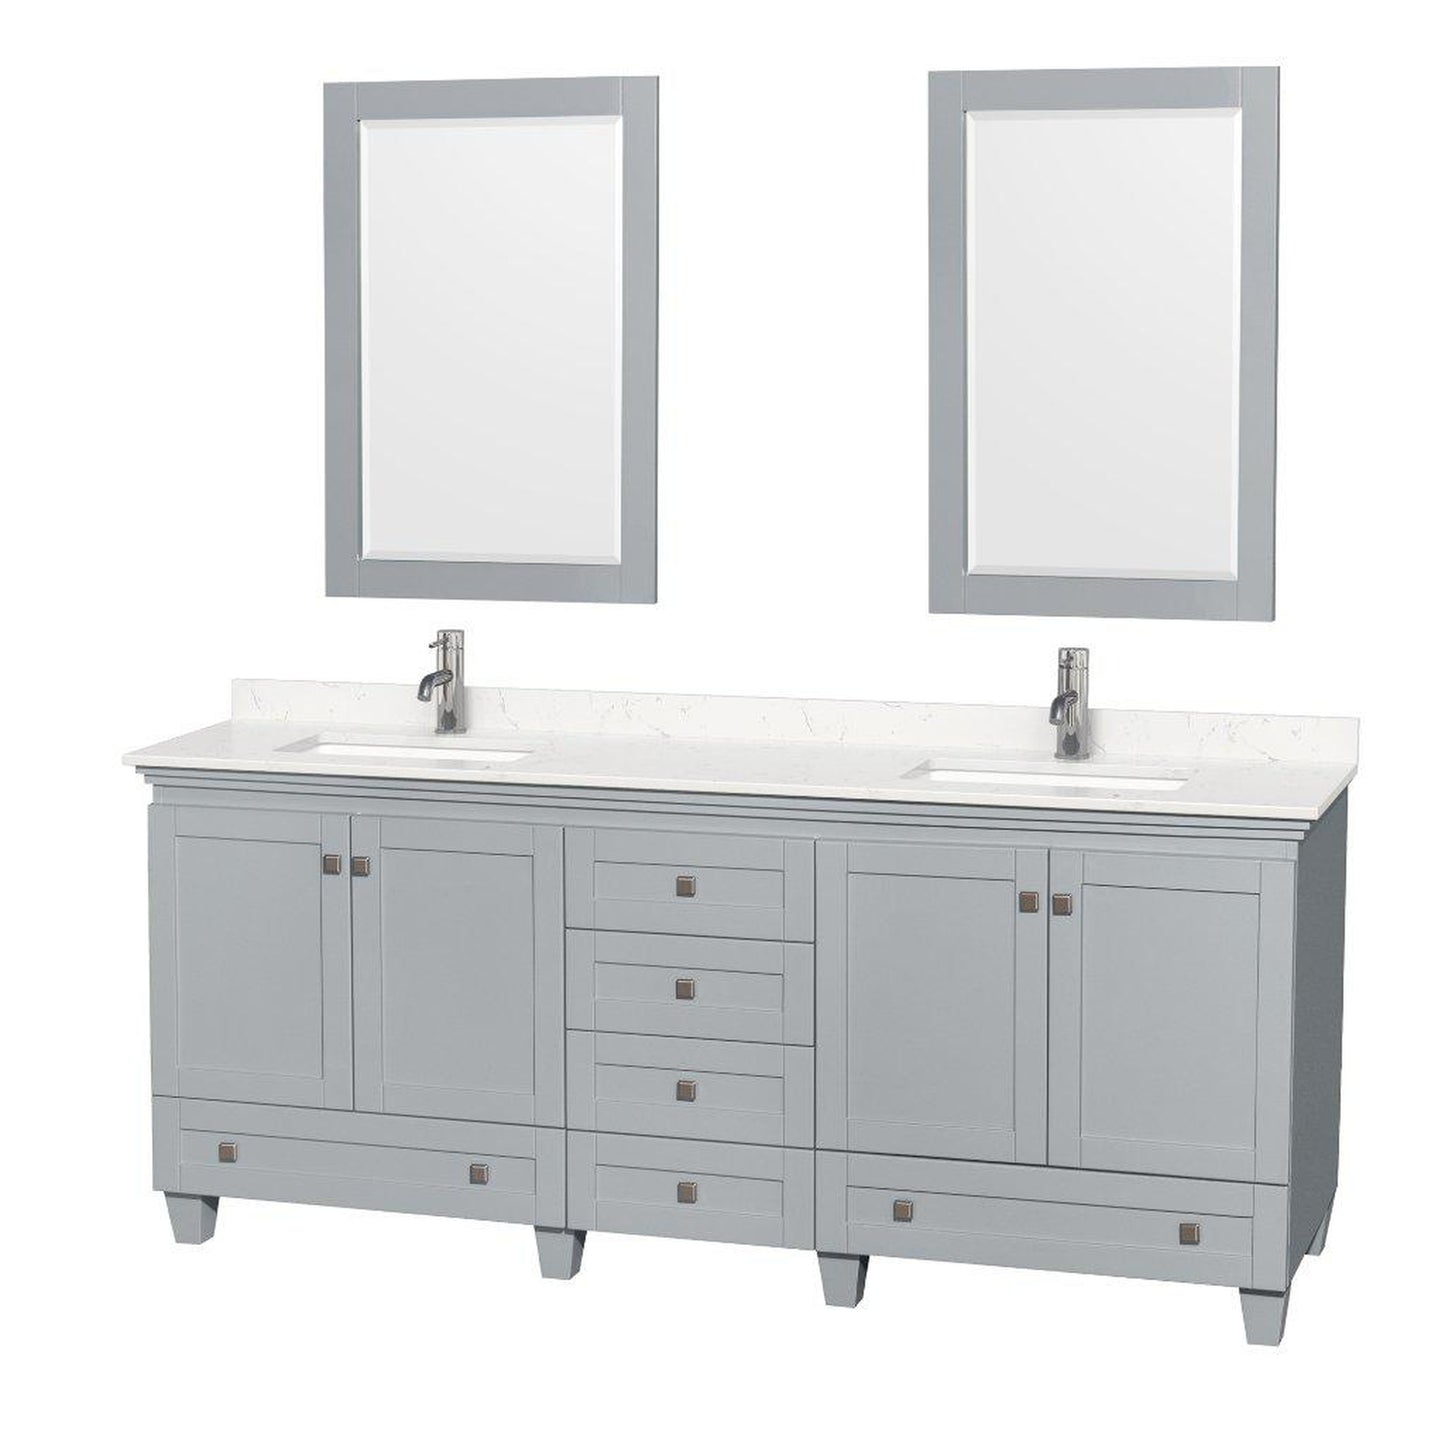 Wyndham Collection Acclaim 80" Double Bathroom Oyster Gray Vanity With Light-Vein Carrara Cultured Marble Countertop And Undermount Square Sinks And 2 Set Of 24" Mirror